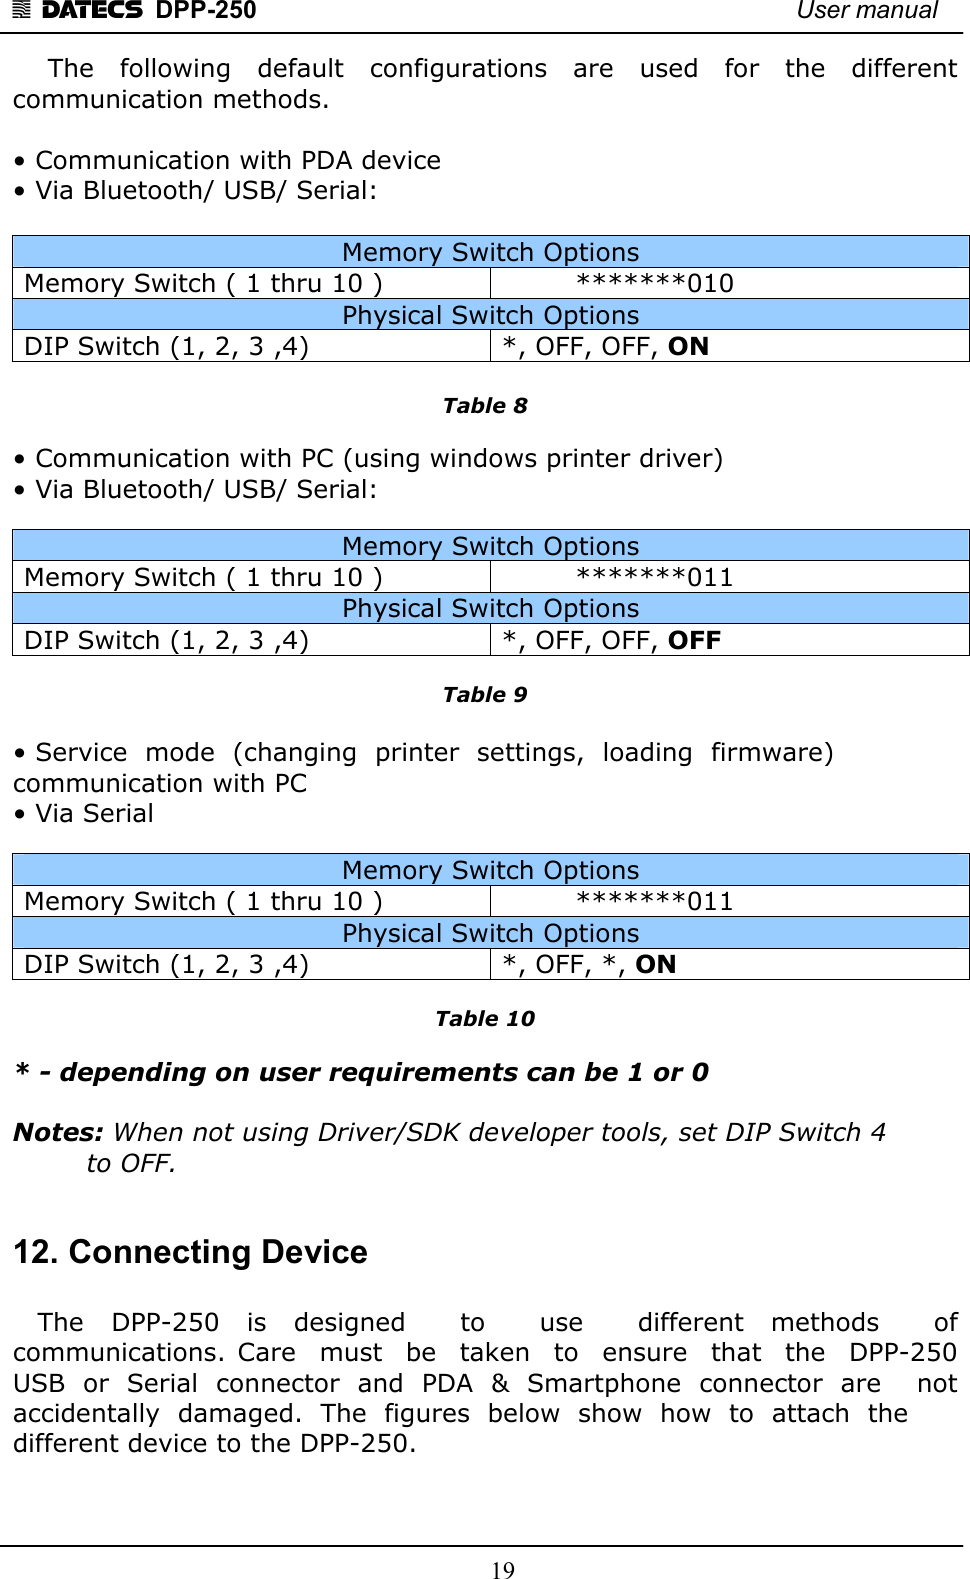 1 DATECS  DPP-250    User manual     19     The  following  default  configurations  are  used  for  the  different communication methods.  • Communication with PDA device  • Via Bluetooth/ USB/ Serial:  Memory Switch Options Memory Switch ( 1 thru 10 )  *******010 Physical Switch Options DIP Switch (1, 2, 3 ,4)  *, OFF, OFF, ON  Table 8  • Communication with PC (using windows printer driver)  • Via Bluetooth/ USB/ Serial:  Memory Switch Options Memory Switch ( 1 thru 10 )  *******011 Physical Switch Options DIP Switch (1, 2, 3 ,4)  *, OFF, OFF, OFF  Table 9  • Service  mode  (changing  printer  settings,  loading  firmware) communication with PC  • Via Serial    Memory Switch Options Memory Switch ( 1 thru 10 )  *******011 Physical Switch Options DIP Switch (1, 2, 3 ,4)  *, OFF, *, ON  Table 10  * - depending on user requirements can be 1 or 0  Notes: When not using Driver/SDK developer tools, set DIP Switch 4    to OFF.  12. Connecting Device      The  DPP-250  is  designed    to    use    different  methods    of communications. Care    must   be   taken    to   ensure   that    the   DPP-250 USB  or  Serial  connector  and  PDA  &amp;  Smartphone  connector  are    not accidentally  damaged.  The  figures  below  show  how  to  attach  the  different device to the DPP-250.    